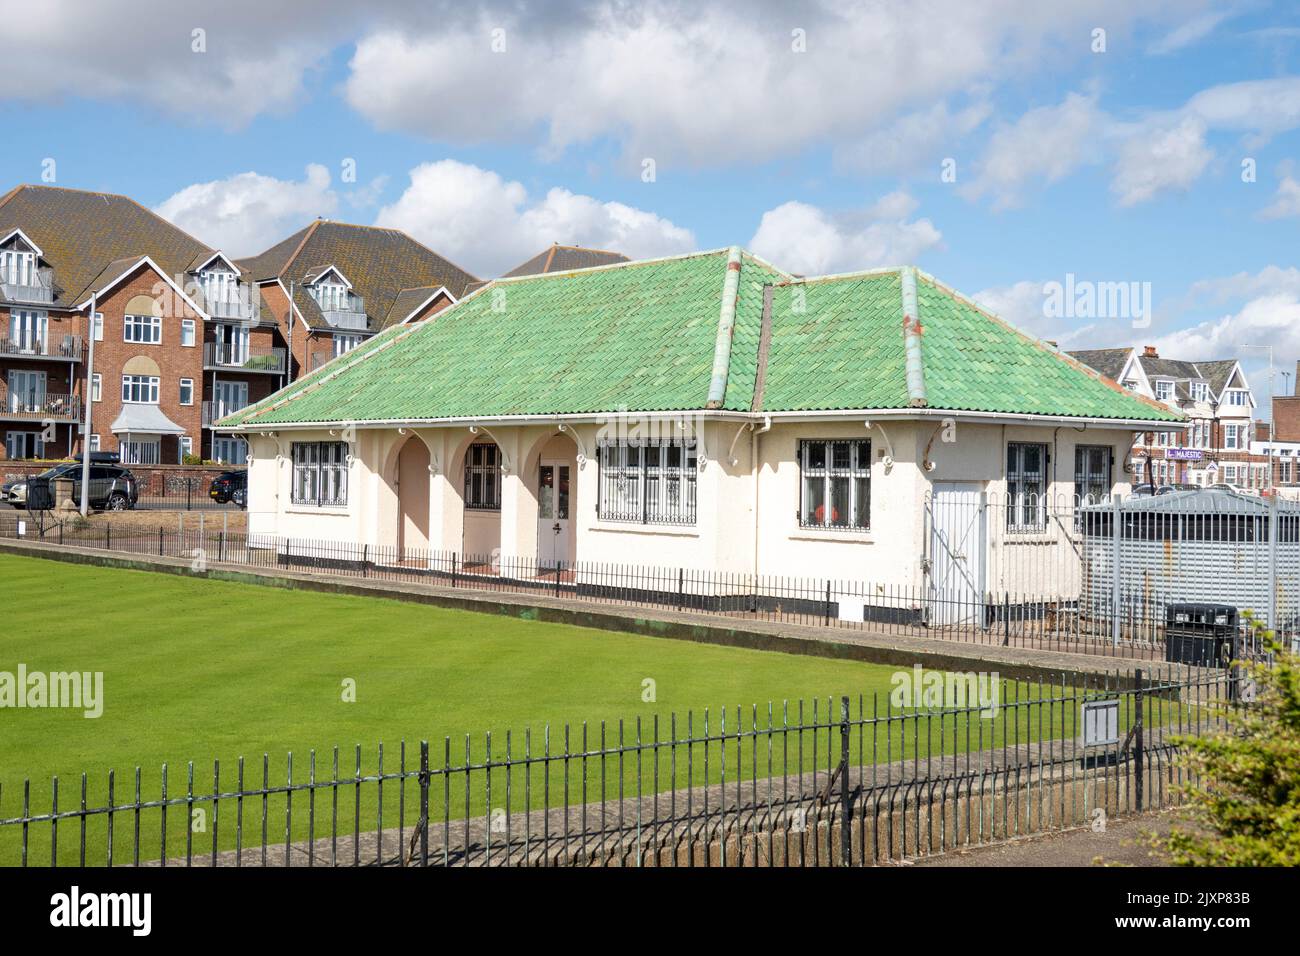 Great Yarmouth Bowling Green building with a unusual green tiled roof Stock Photo